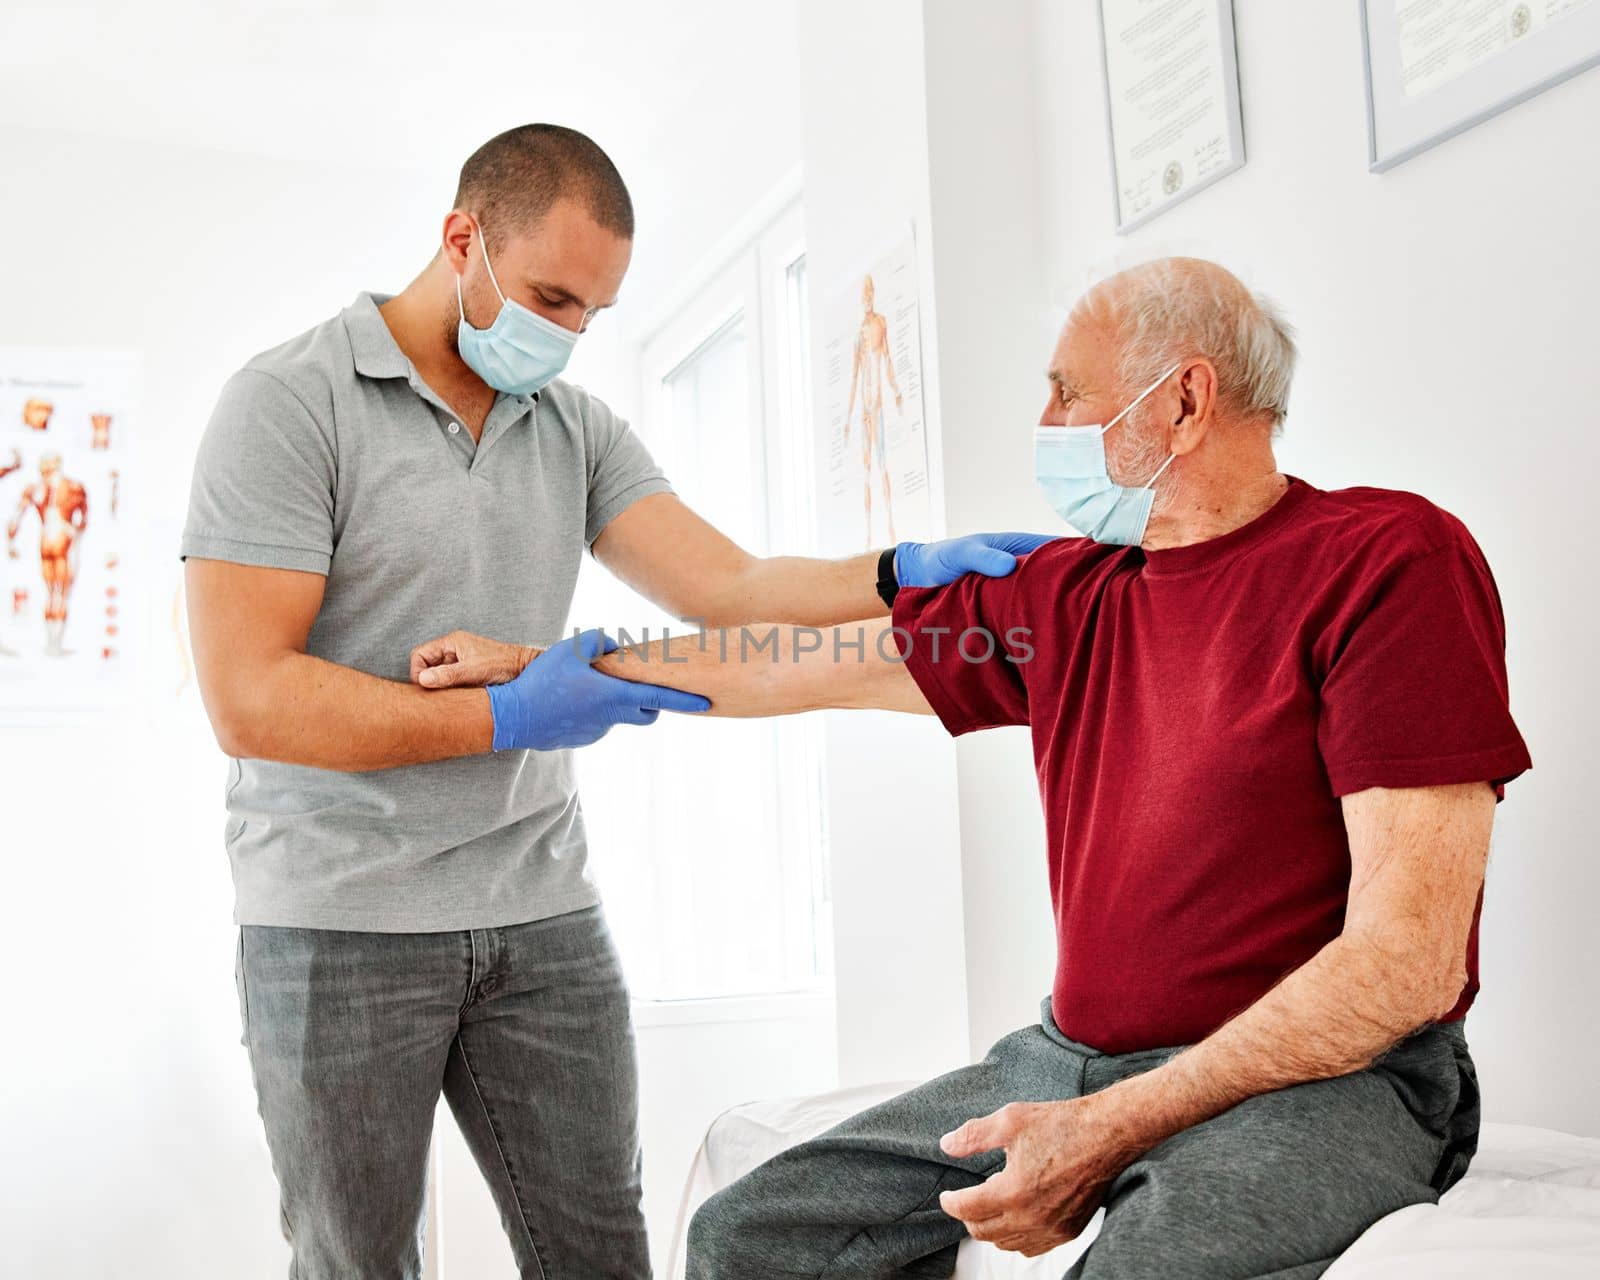 nurse doctor senior care exercise physical therapy exercising help assistence retirement home physiotherapy strech band clinic therapist elderly man stretching by Picsfive